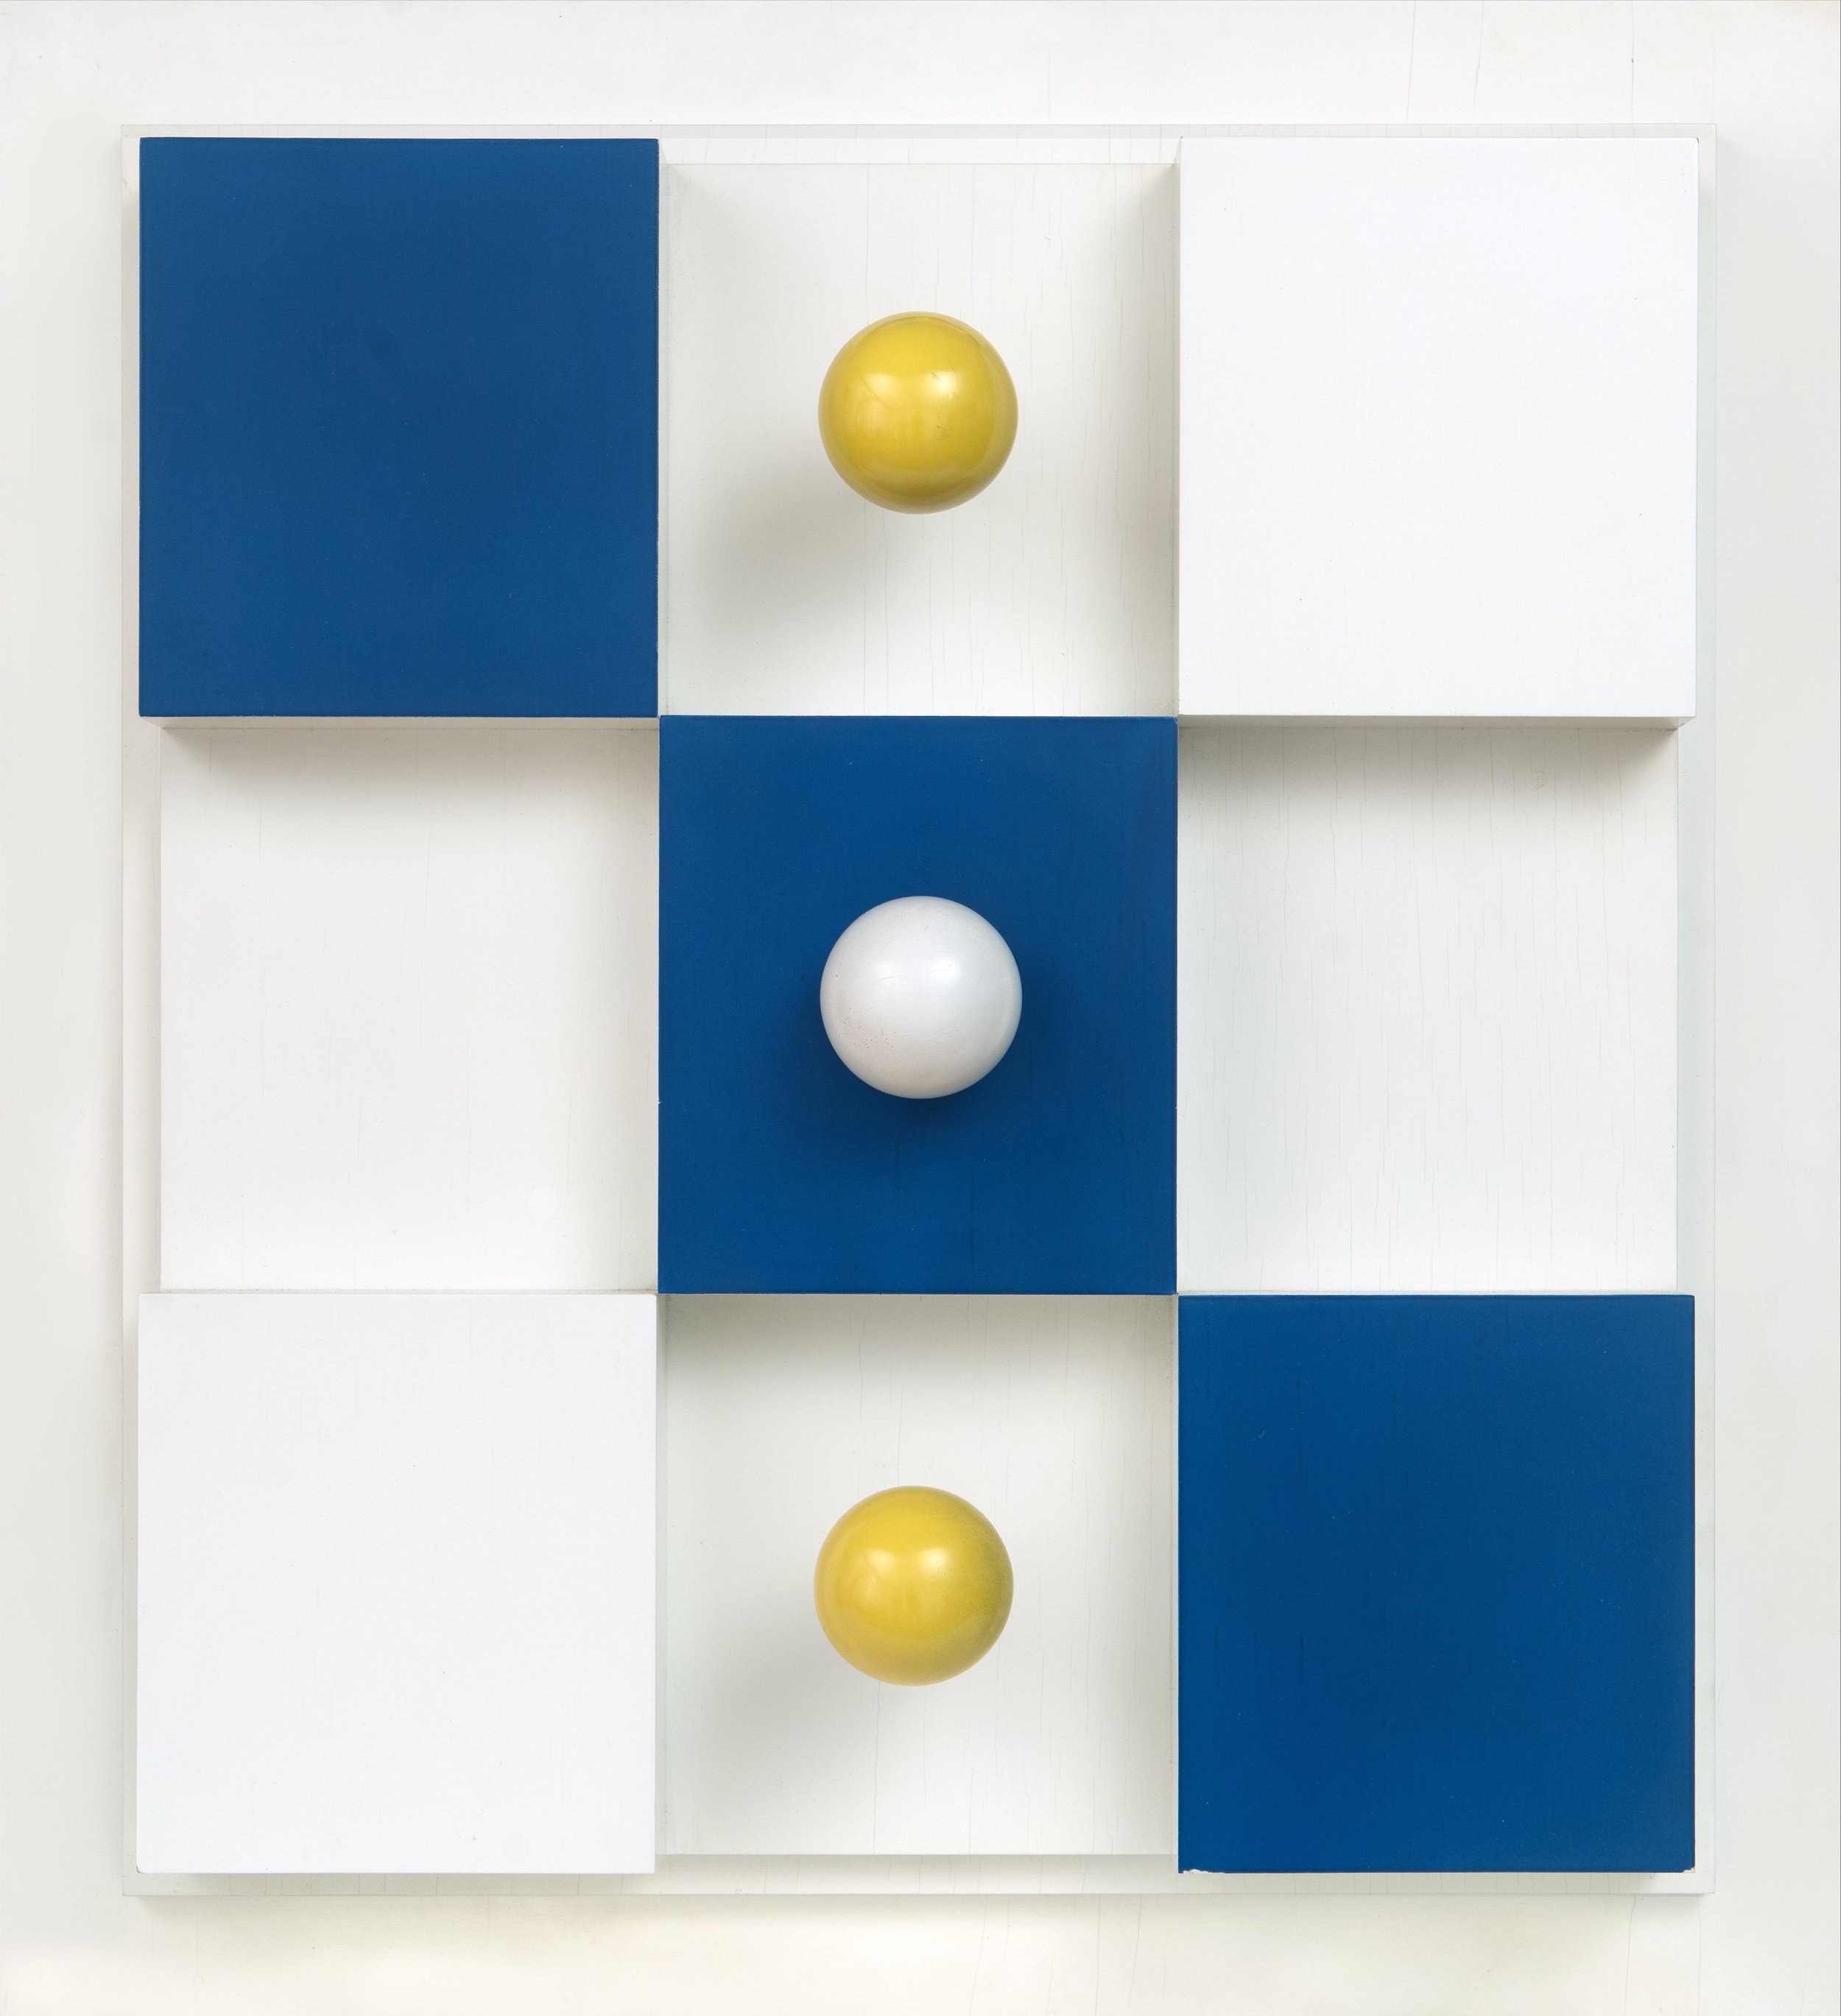 Constructing Biederman &lt;alt: Geometric wood construction of cubes and spheres in white, blue, and yellow. &lt;/&gt;